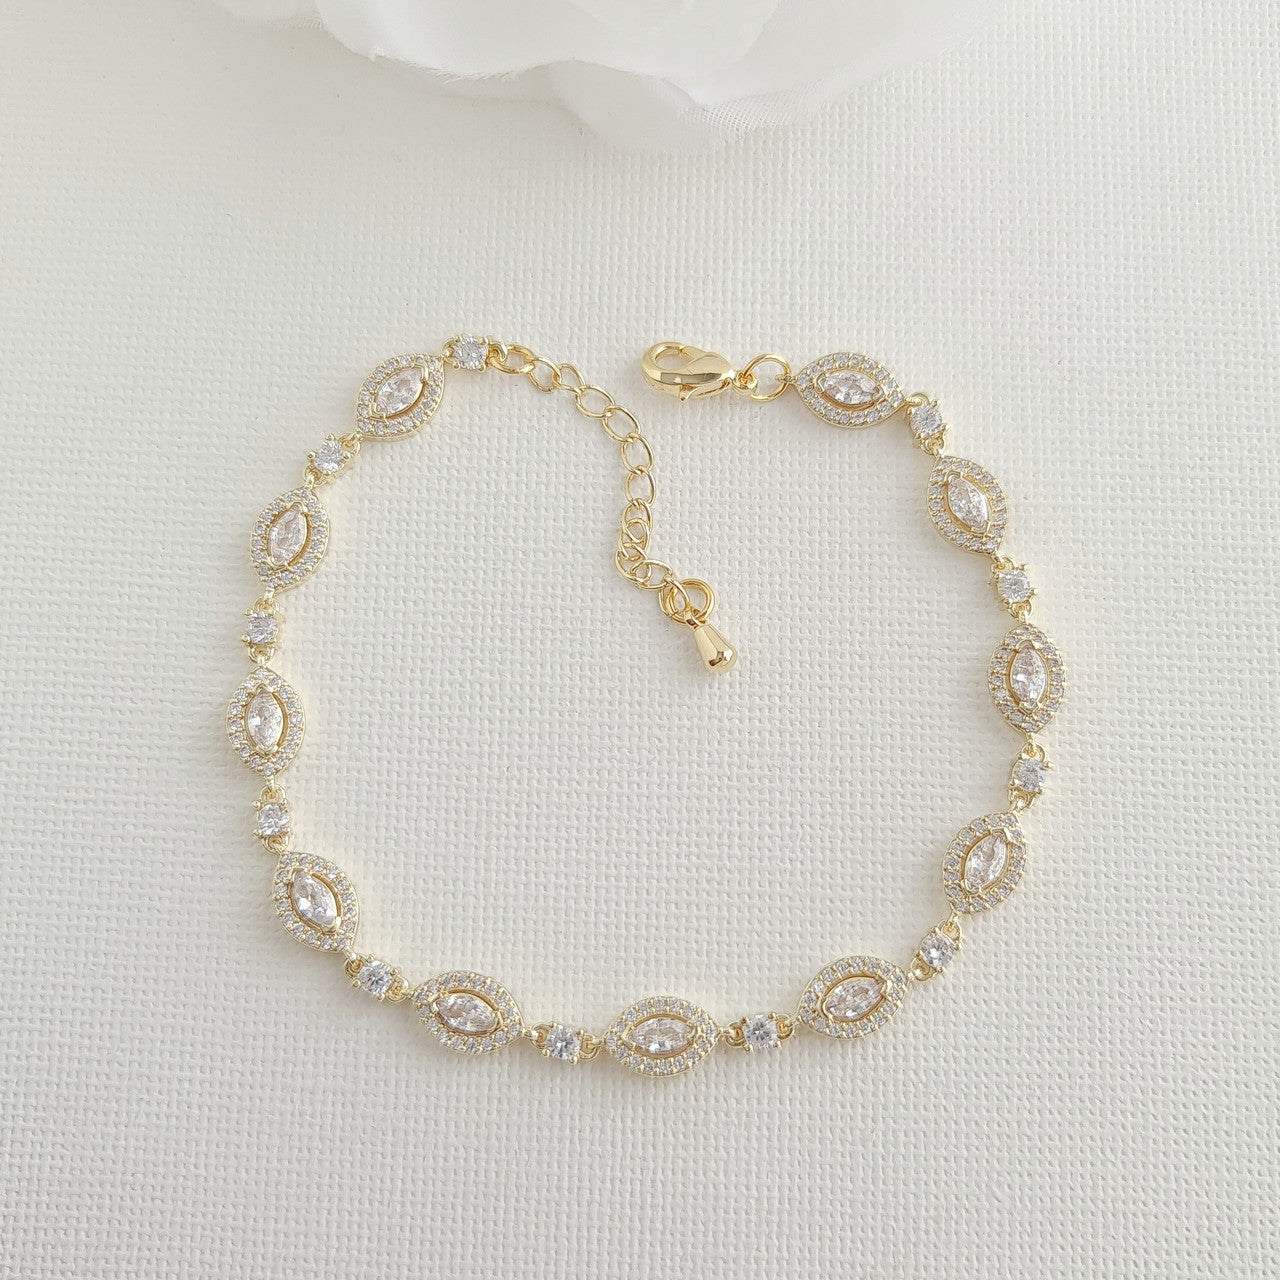 Marquise Bracelet in Cubic Zirconia for Brides-Abby